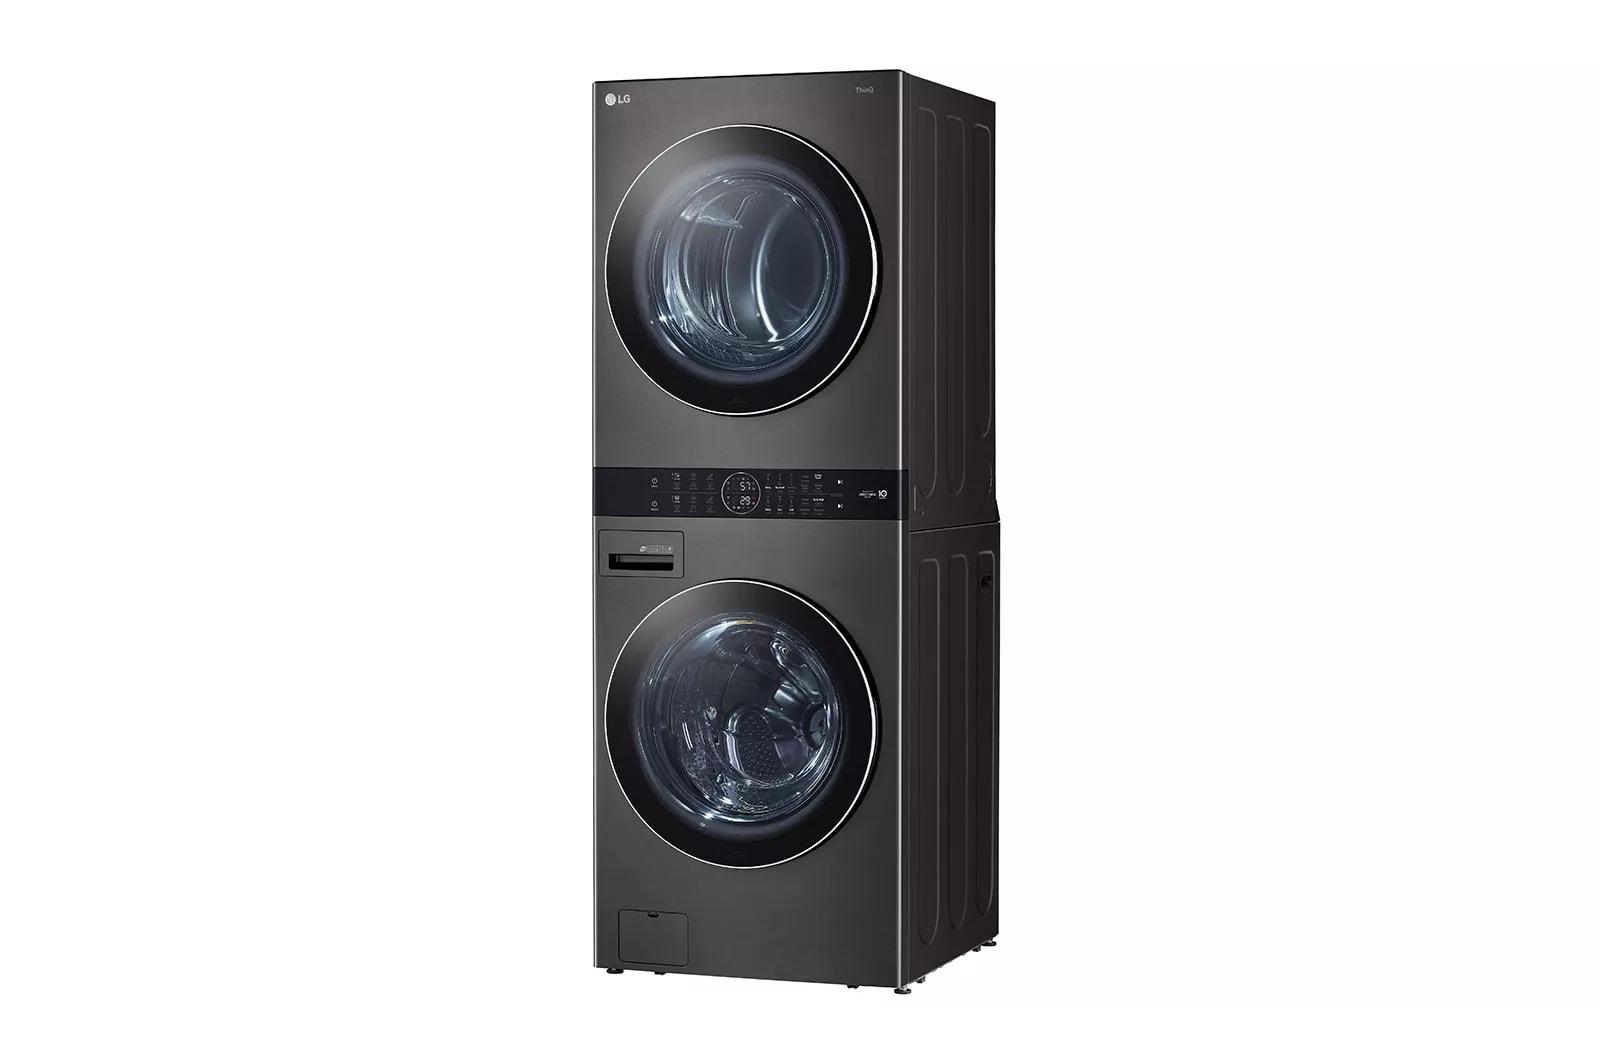 LG Electric Washer Tower - image 3 of 5